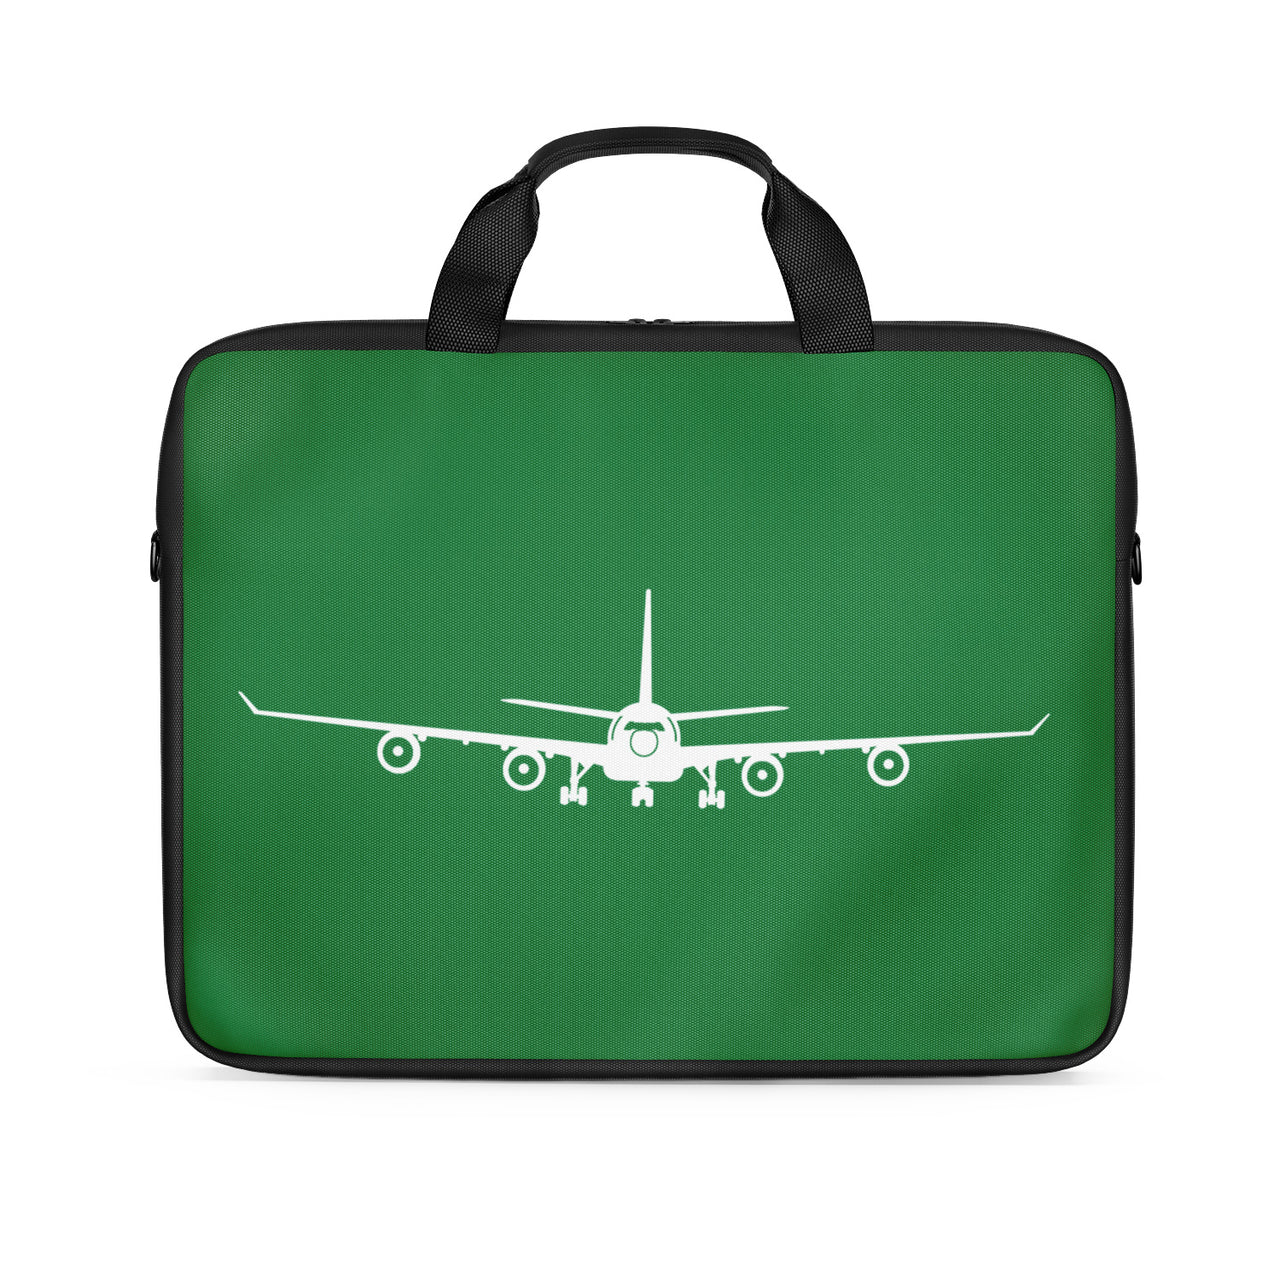 Airbus A340 Silhouette Designed Laptop & Tablet Bags